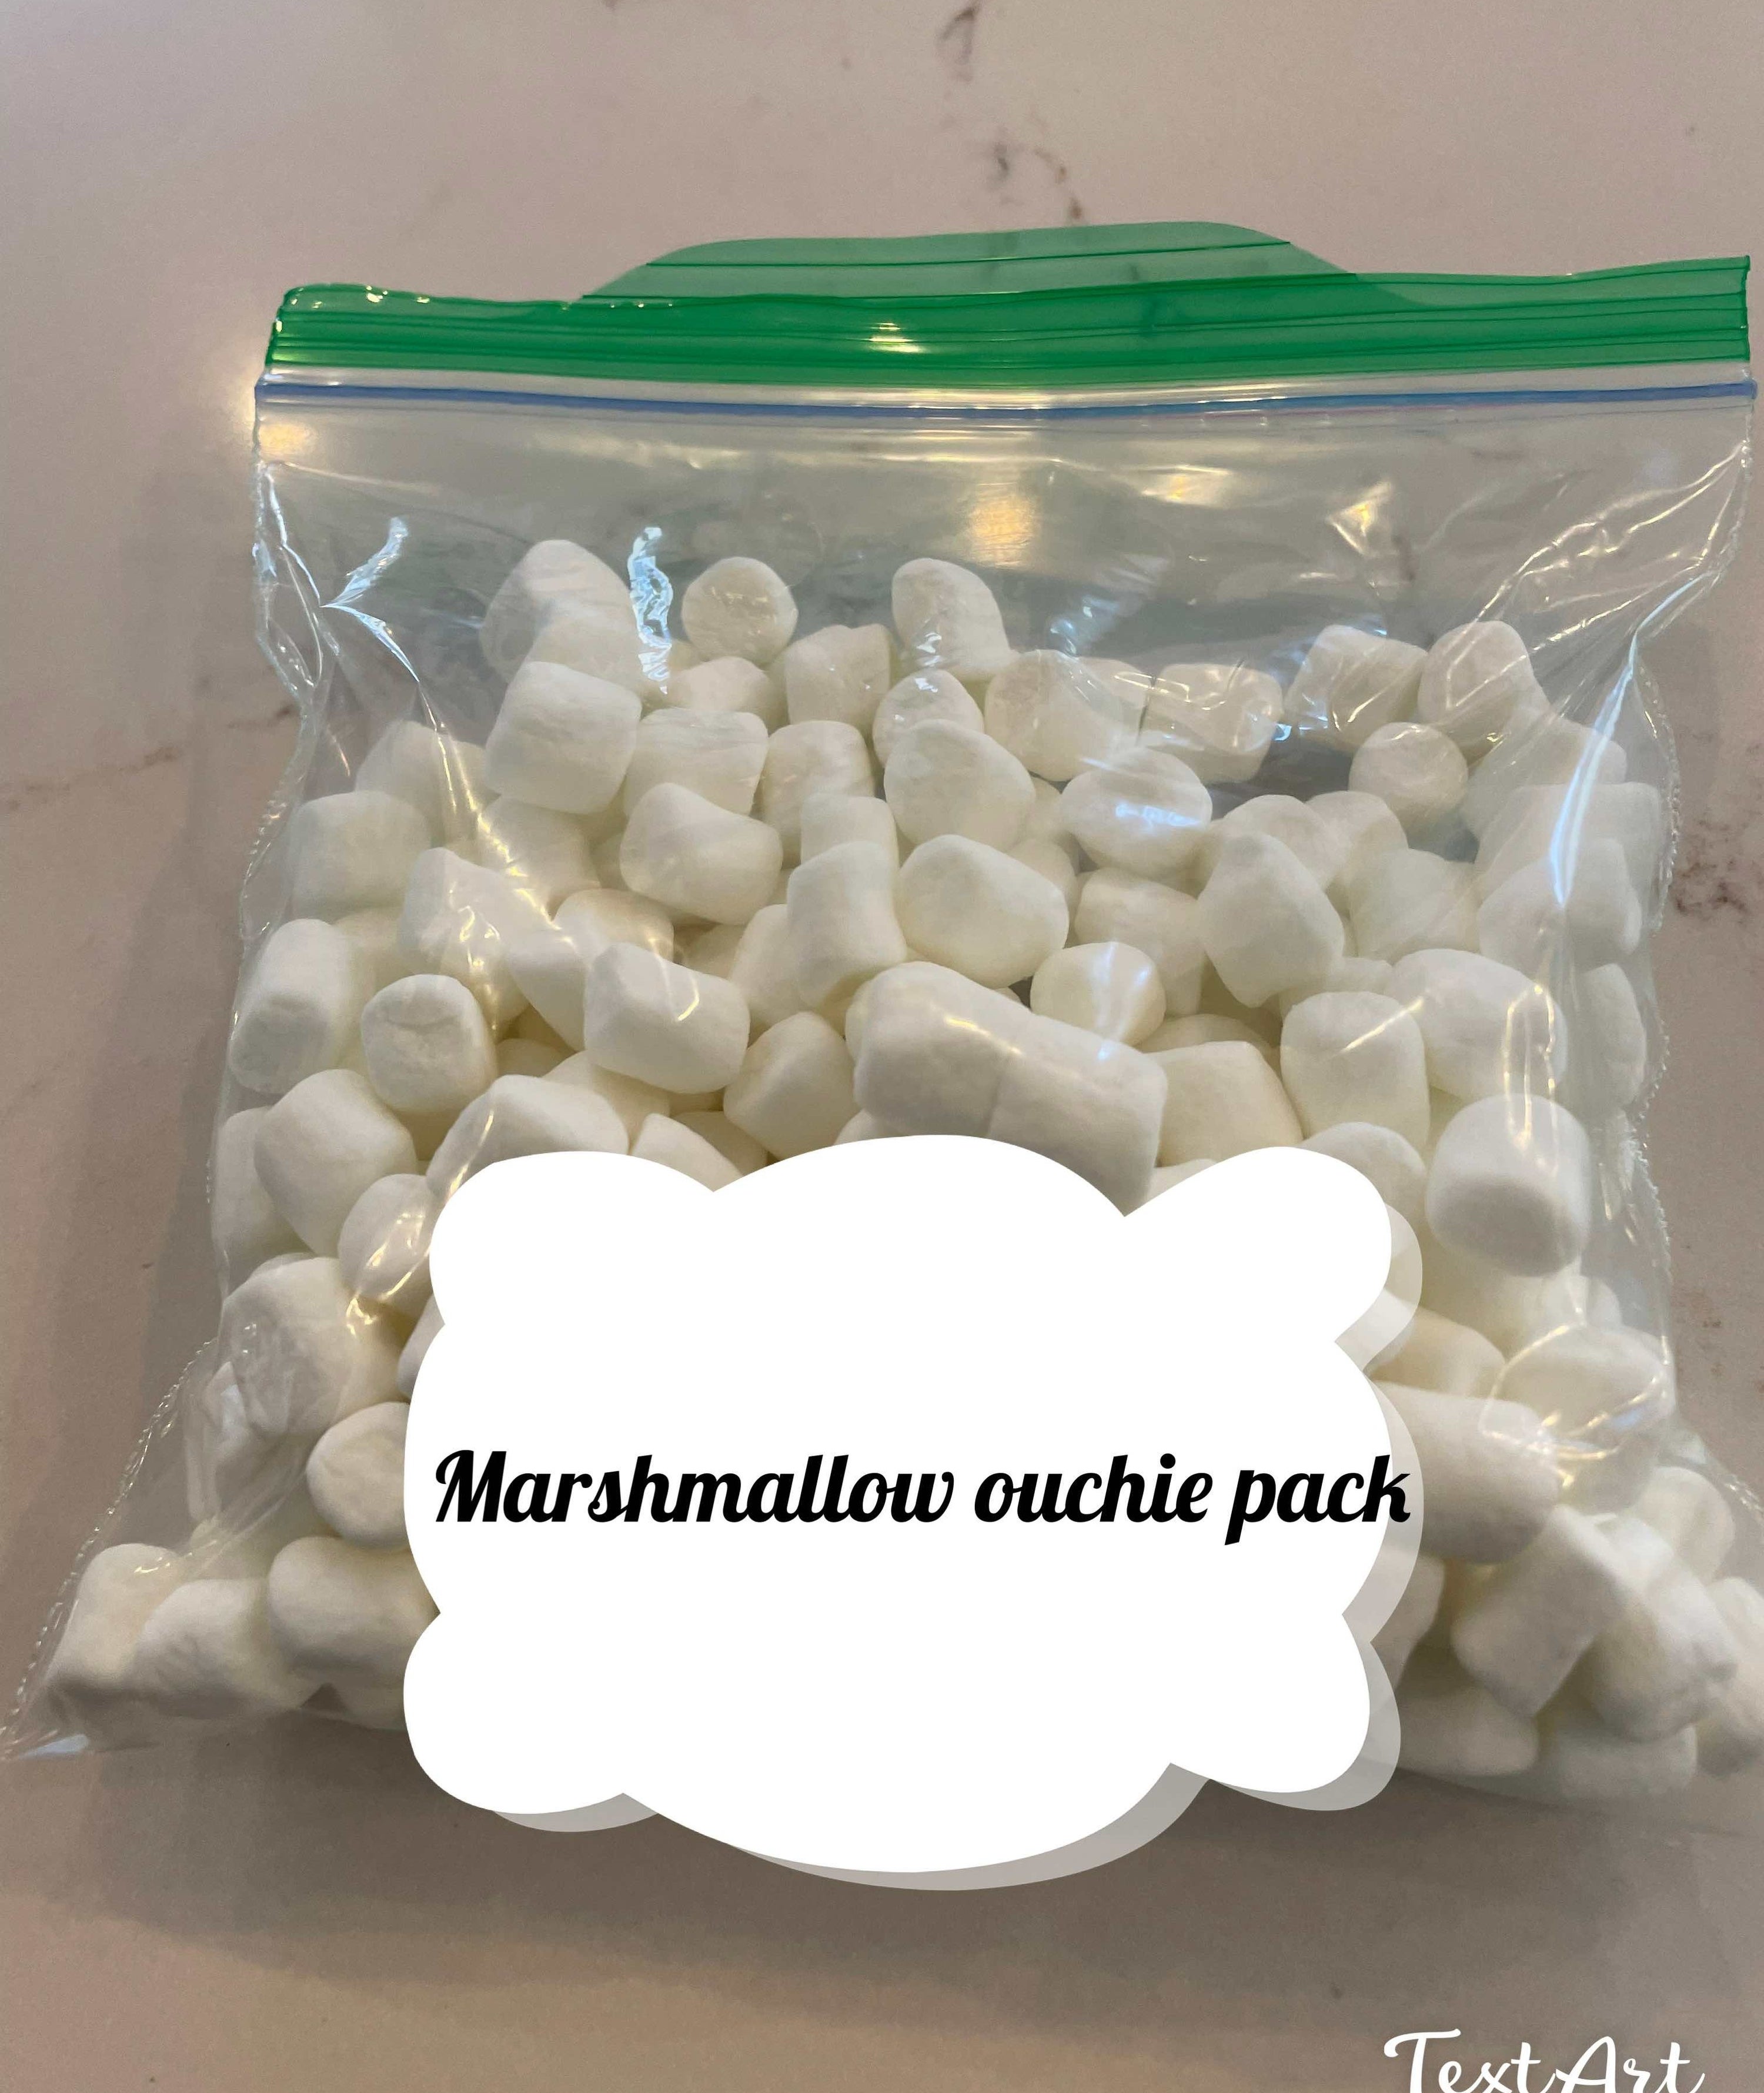 A photo of frozen marshmallows in a Ziploc bag